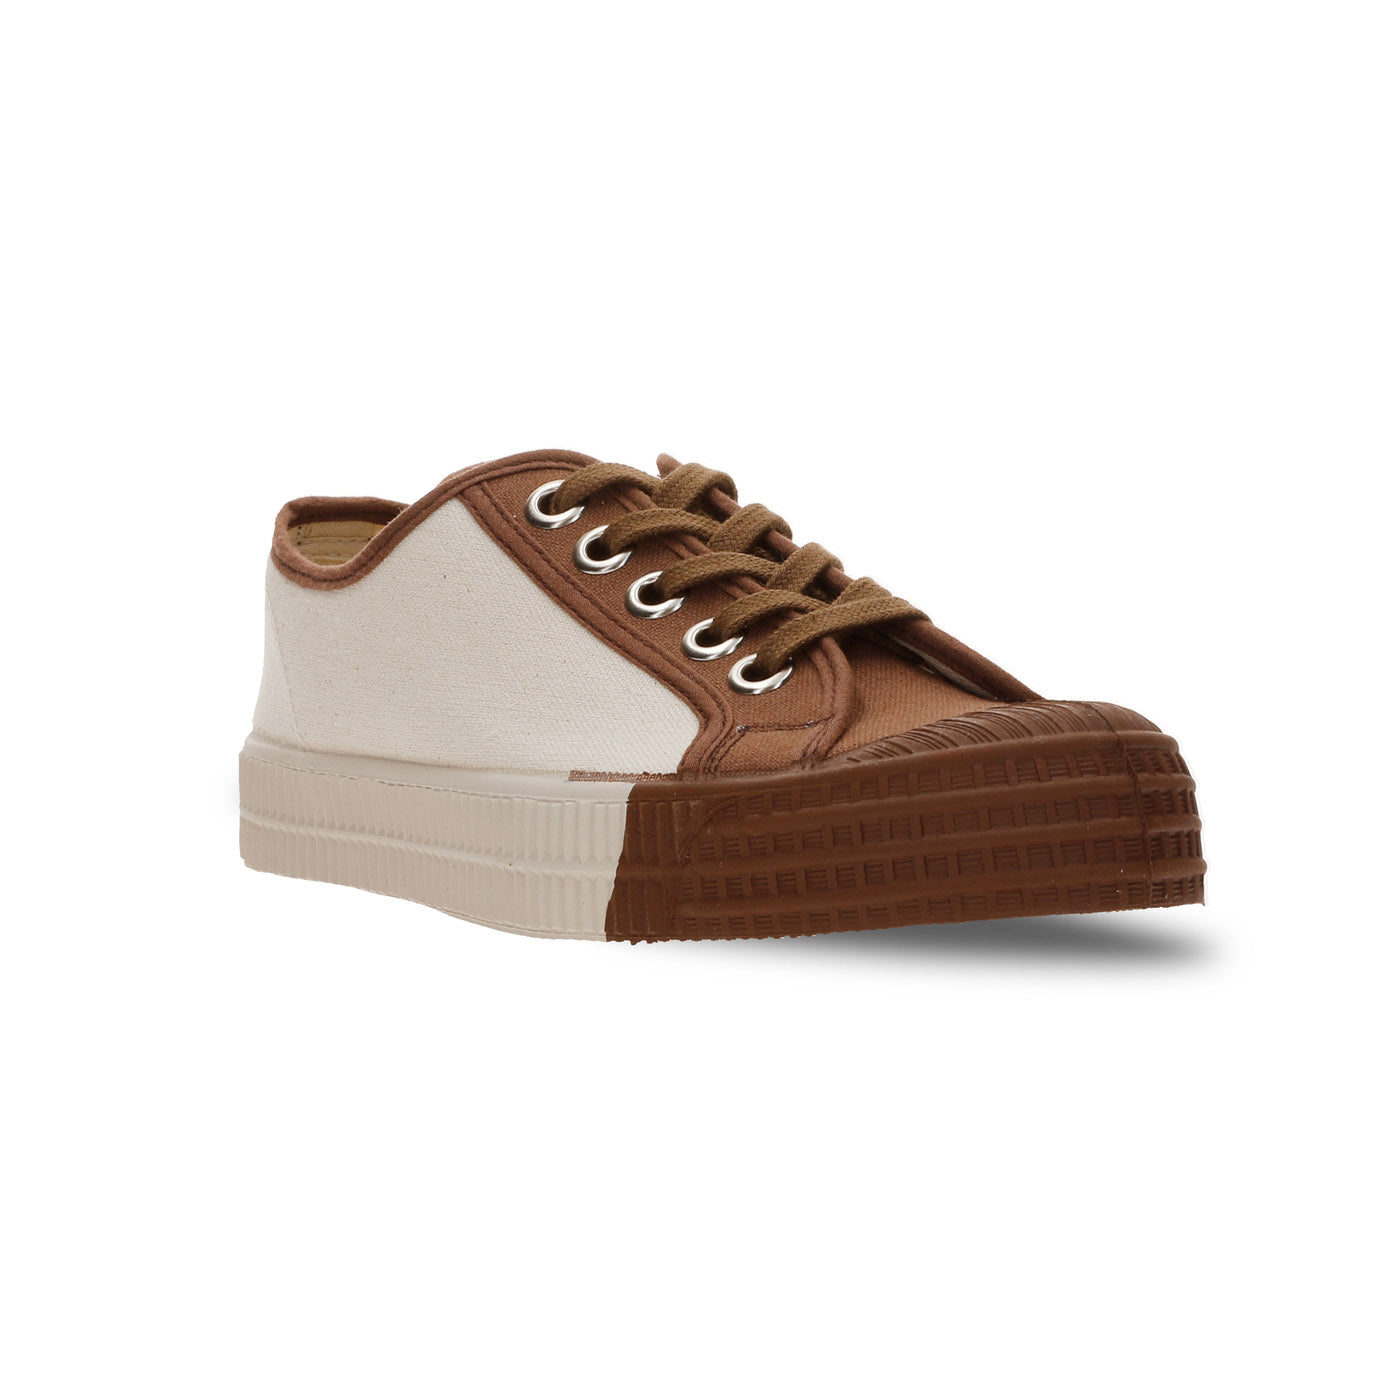 STAR MASTER TOE-COLORED 99BEIGE/BROWN/WHEAT